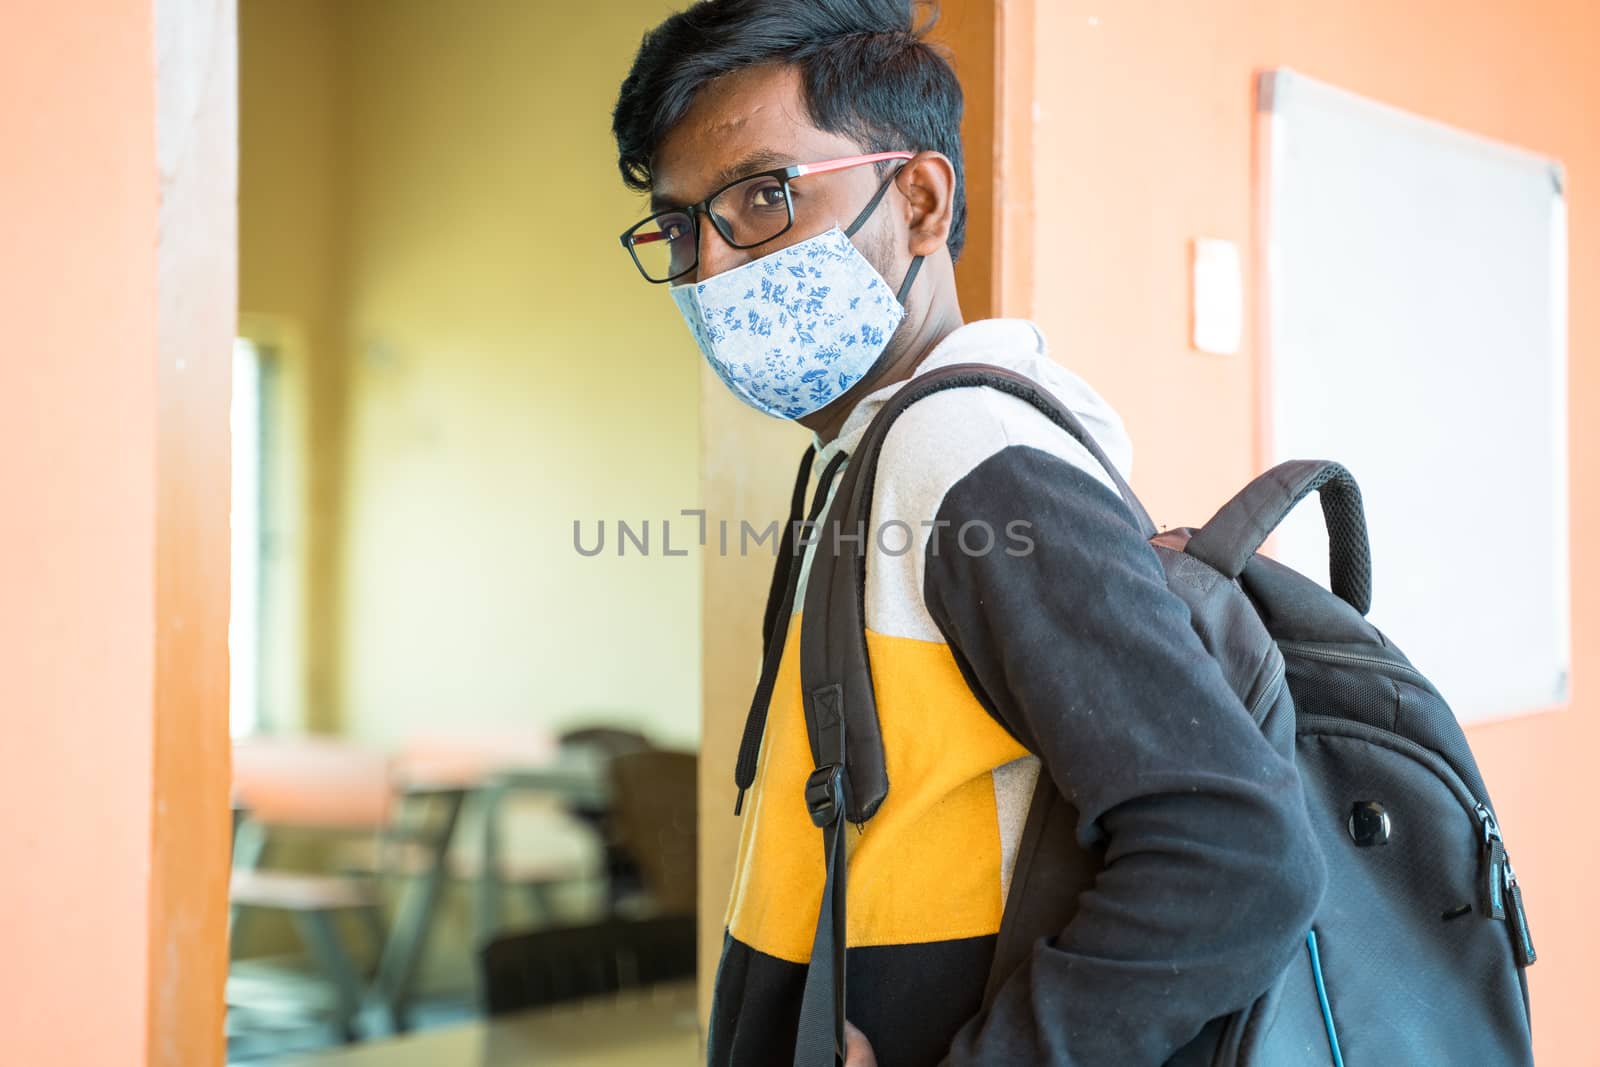 College student with face mask looking into camera before entering classroom - concept of college reopen, new normal lifestyle after coronavirus or covid-19 pandemic.